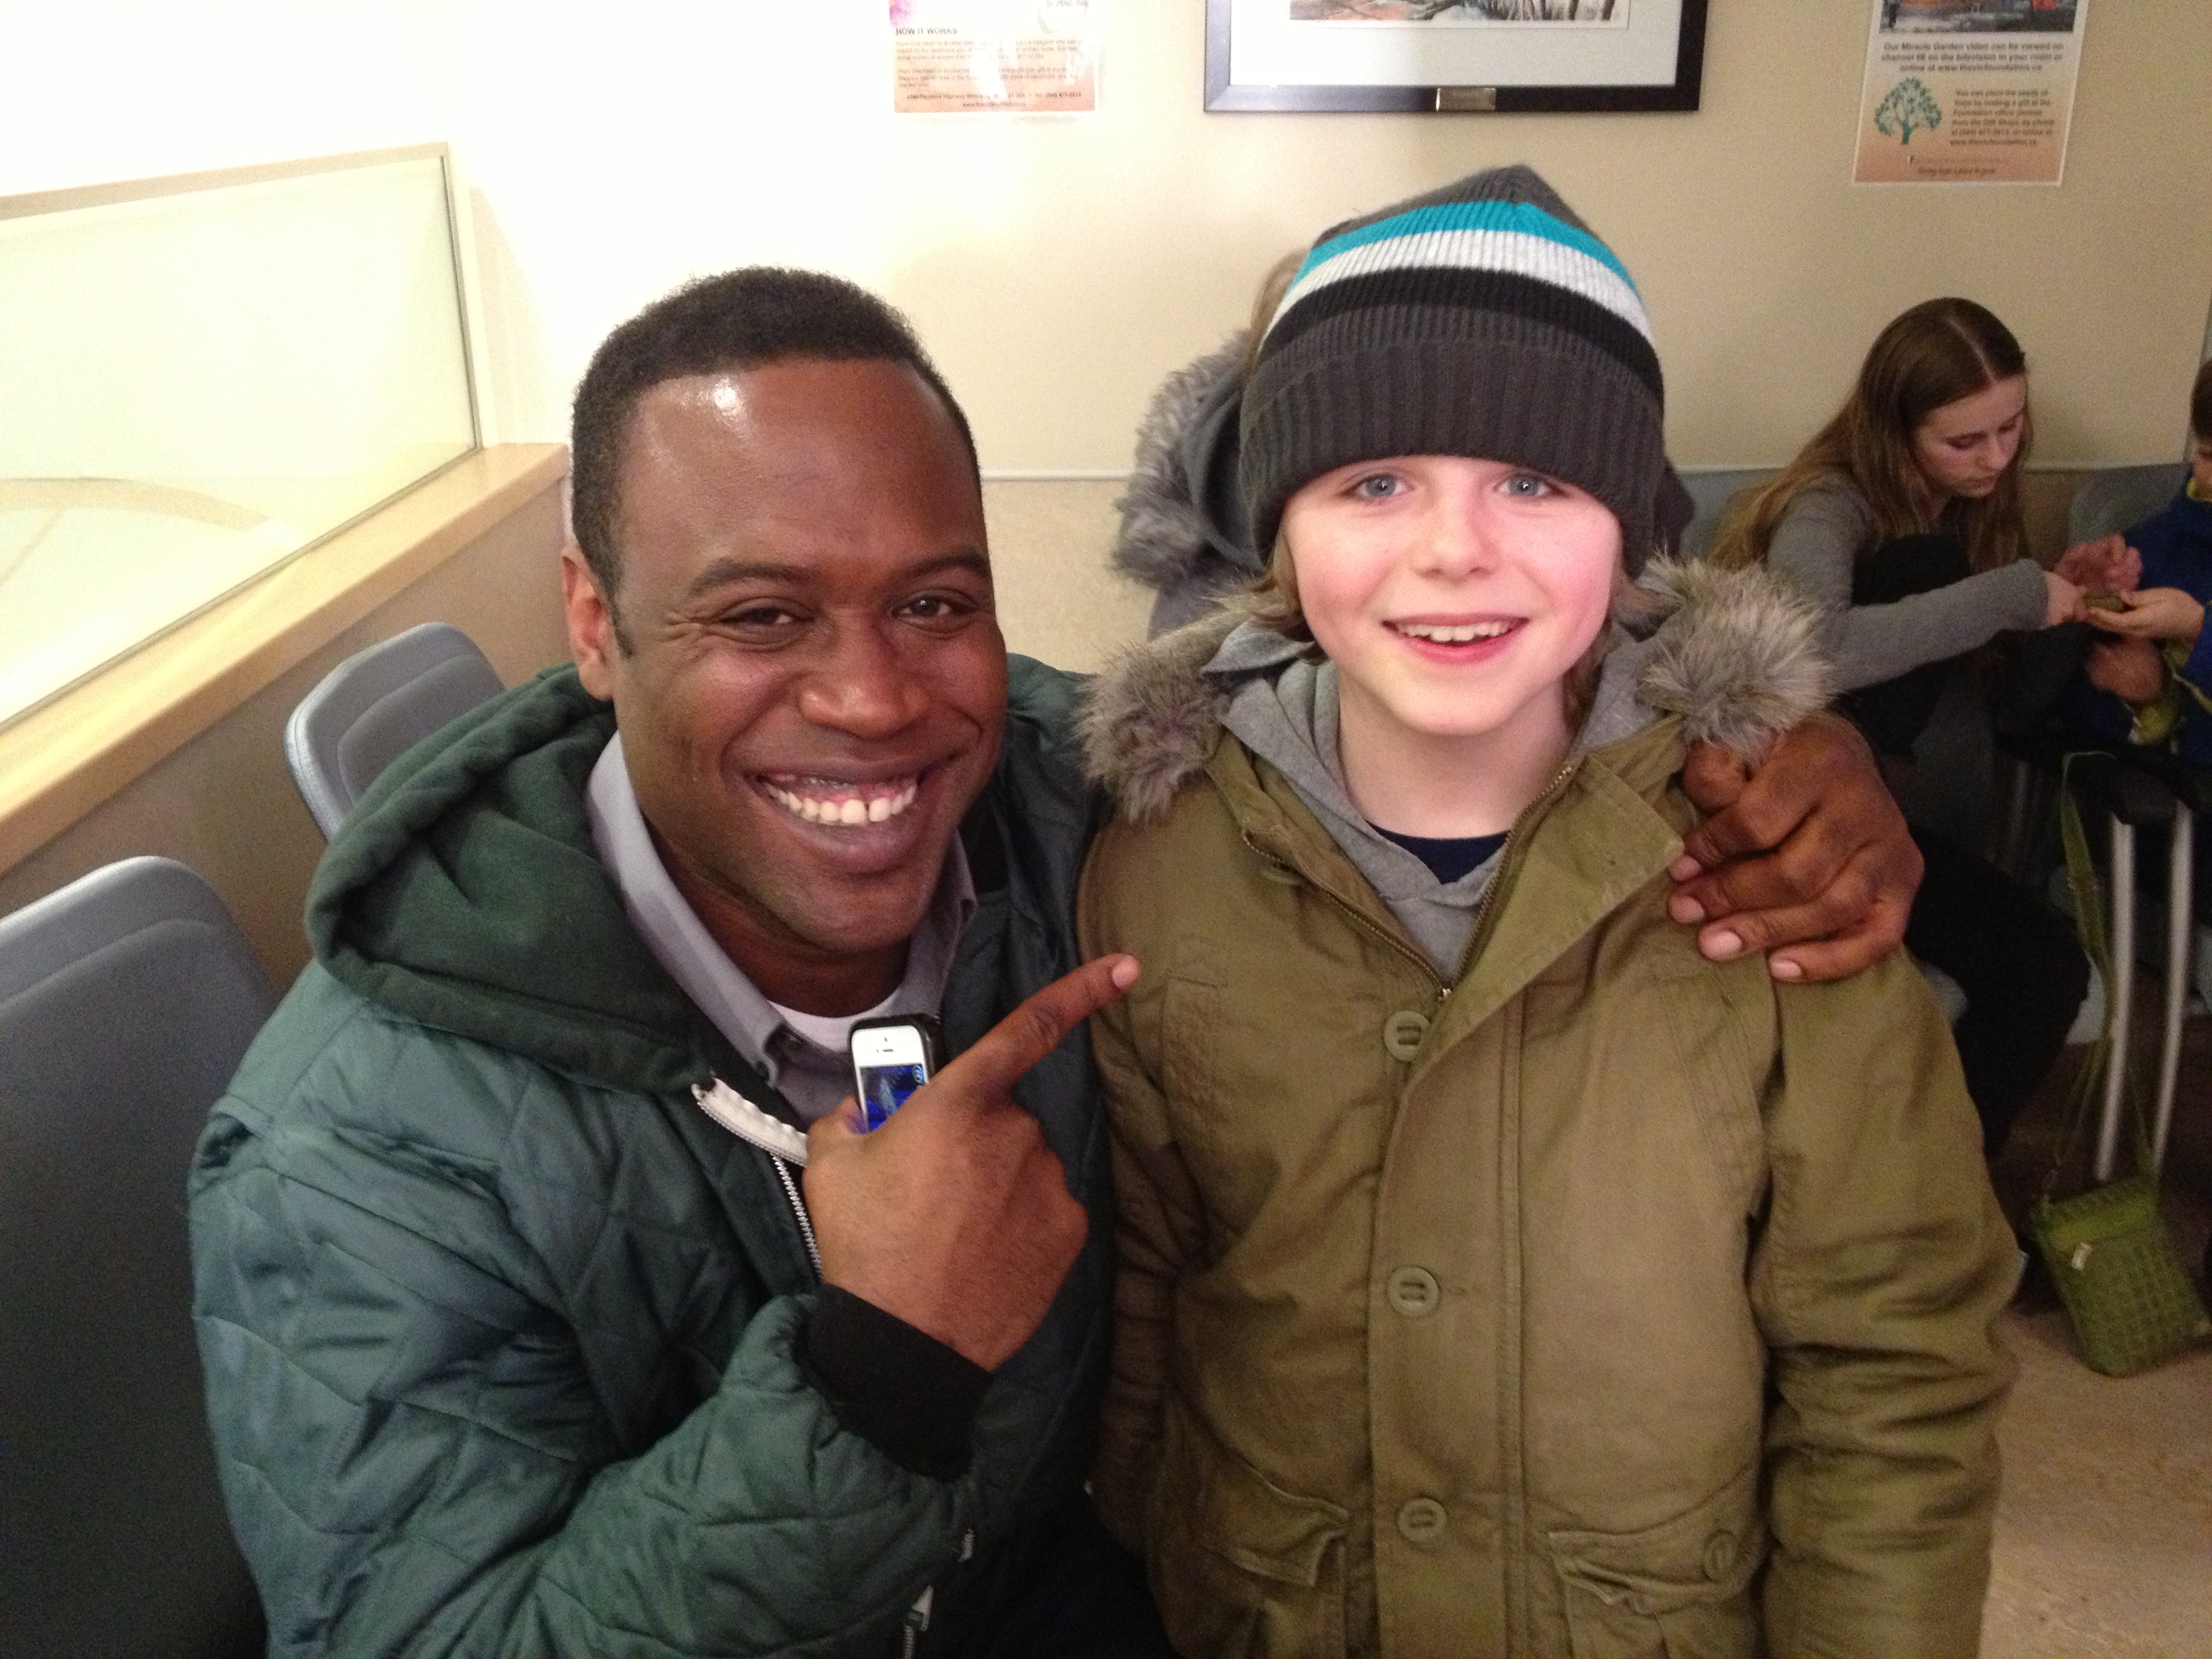 Griffin Kane with Kevin Daniels behind-the-scenes of One Christmas Eve, 2014.